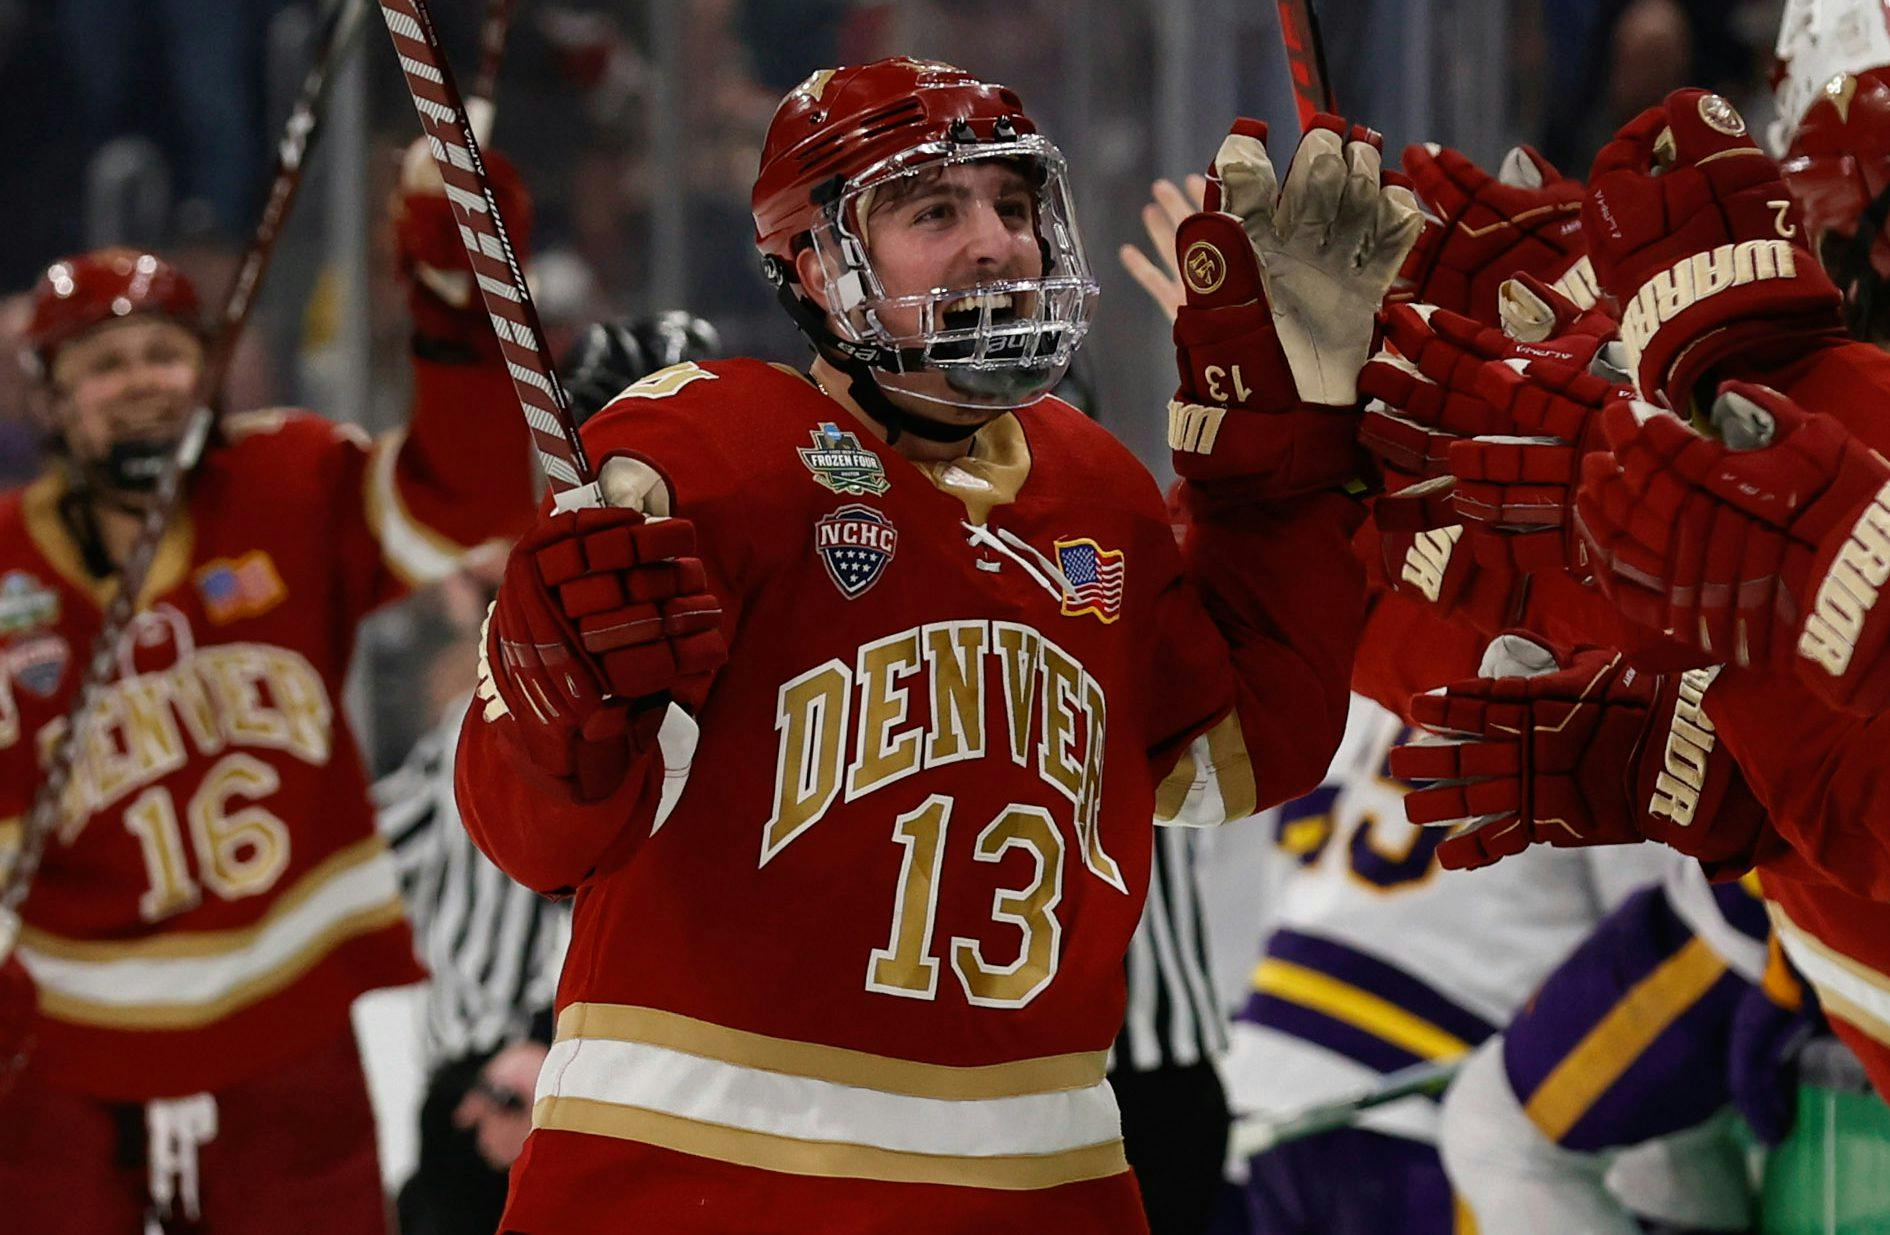 Top five NHL prospects who could turn pro after NCAA championship